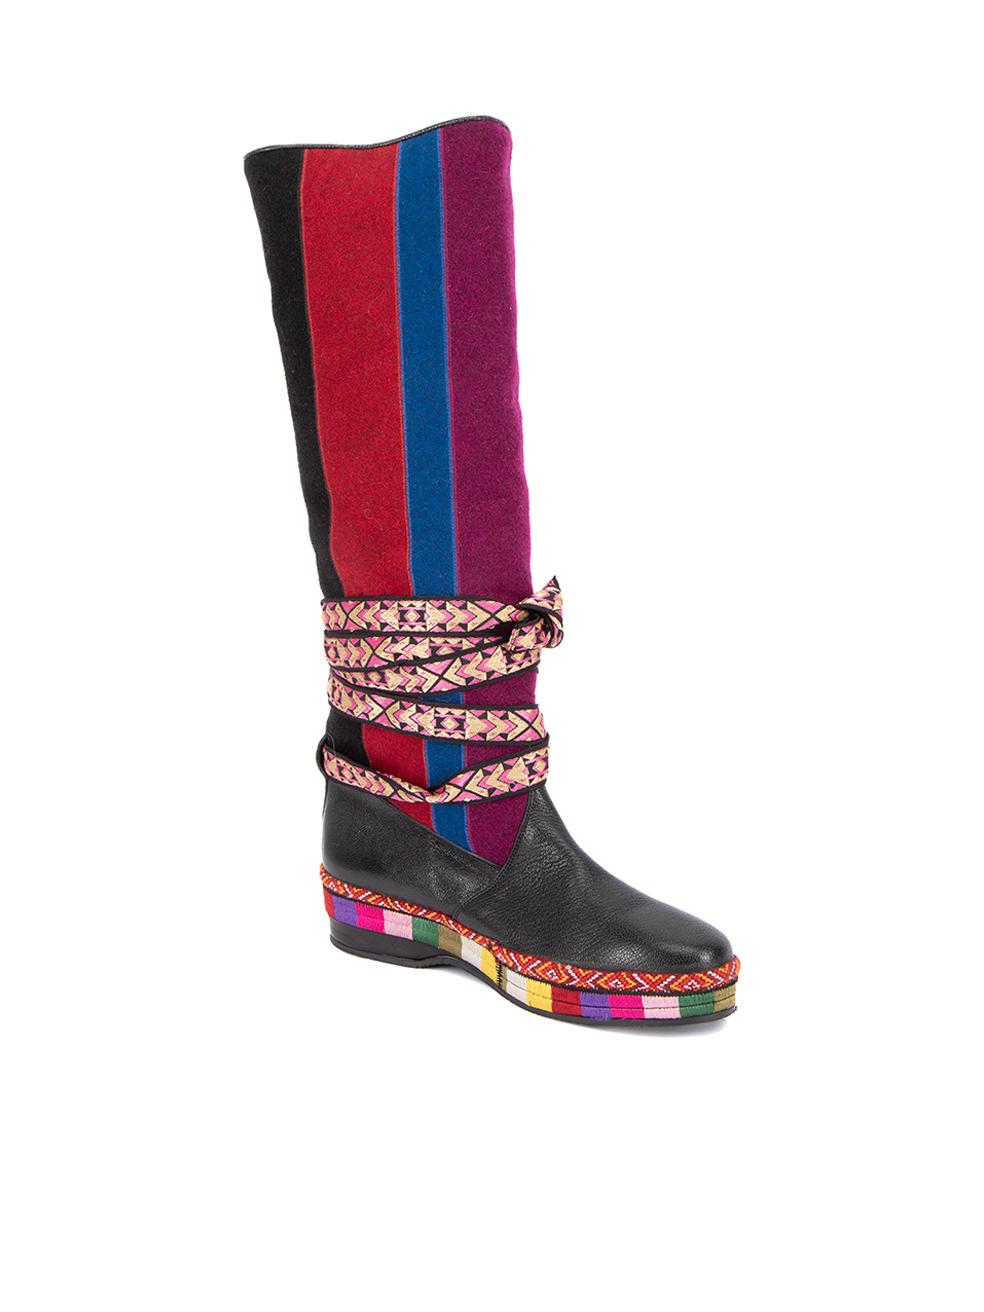 CONDITION is Very good. Minimal wear to shoes is evident. Loose threads on the front right toe can be seen on this used Etro designer resale item.   Details  Multicolour Leather and wool Knee high boots Ethnic pattern Round toe Flatform heel